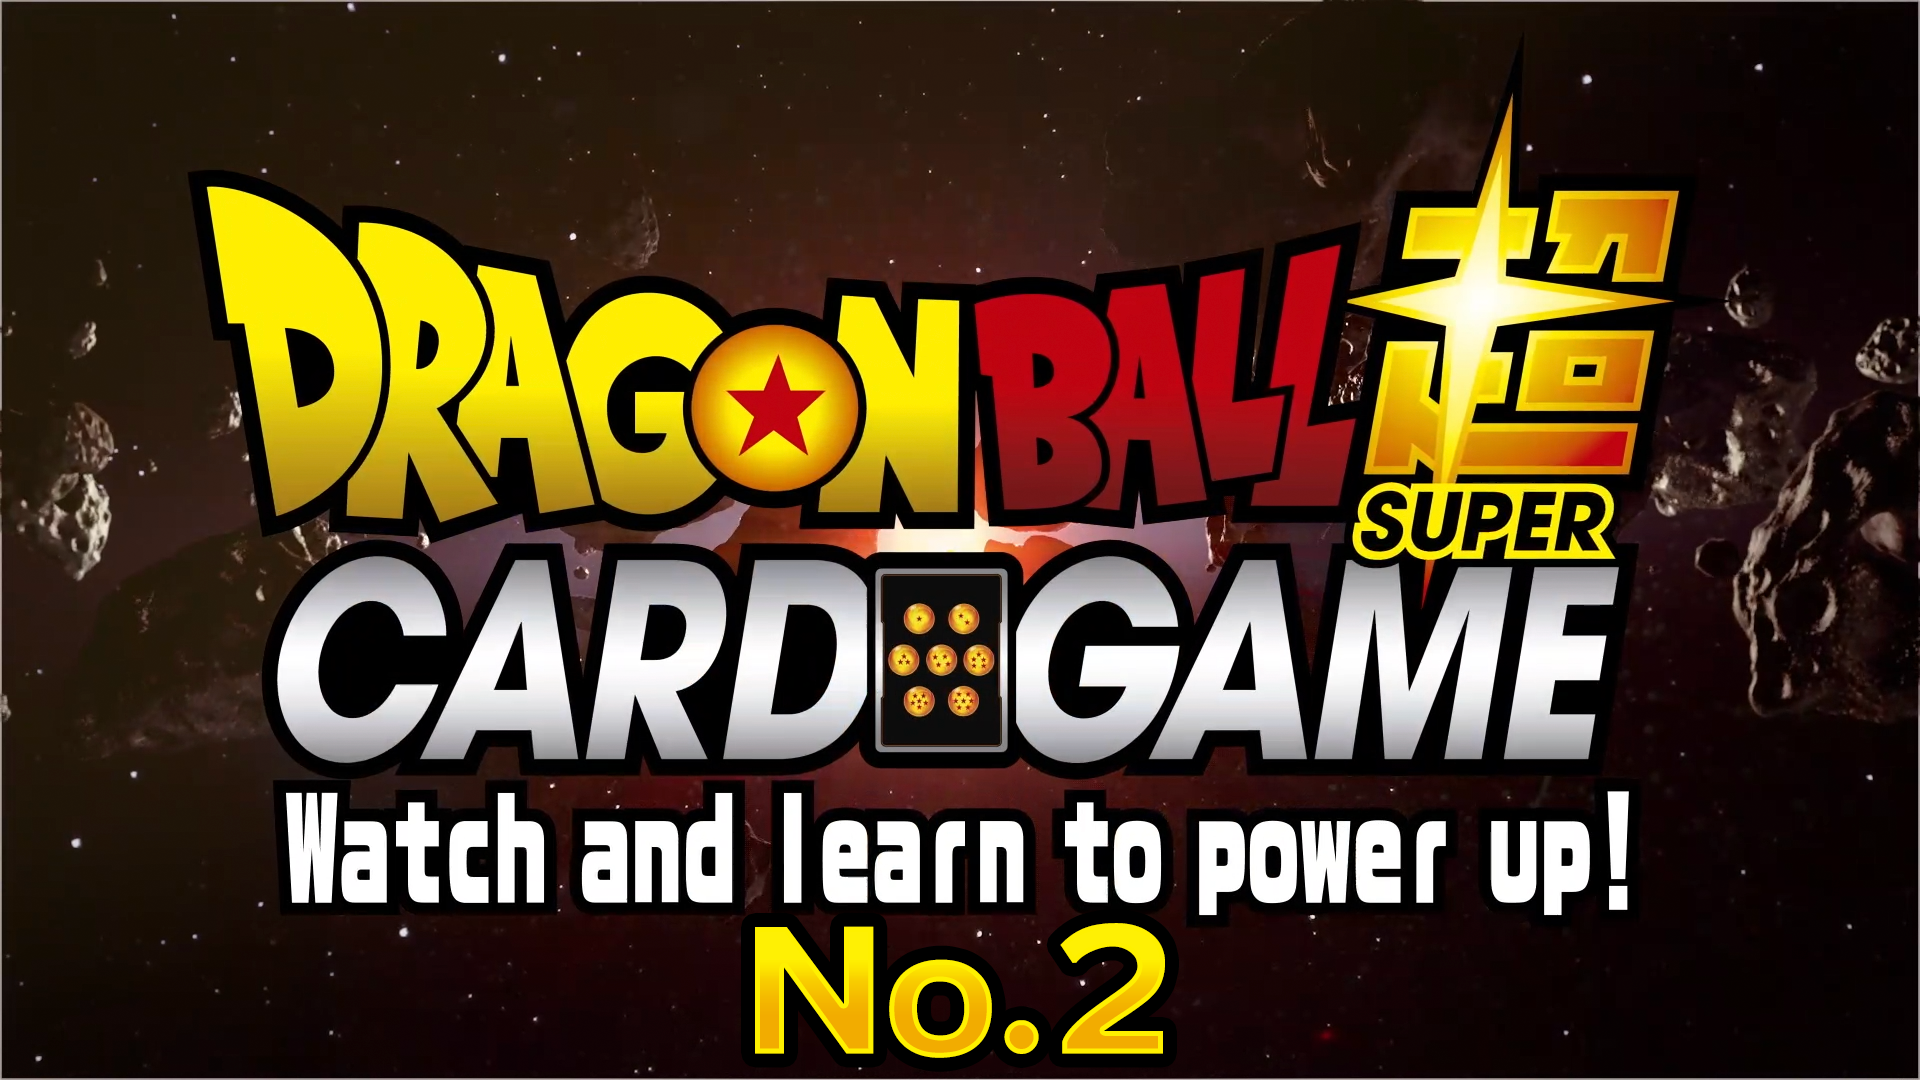 Dragon Ball Super Card Game: Watch and Learn to Power Up! No. 2